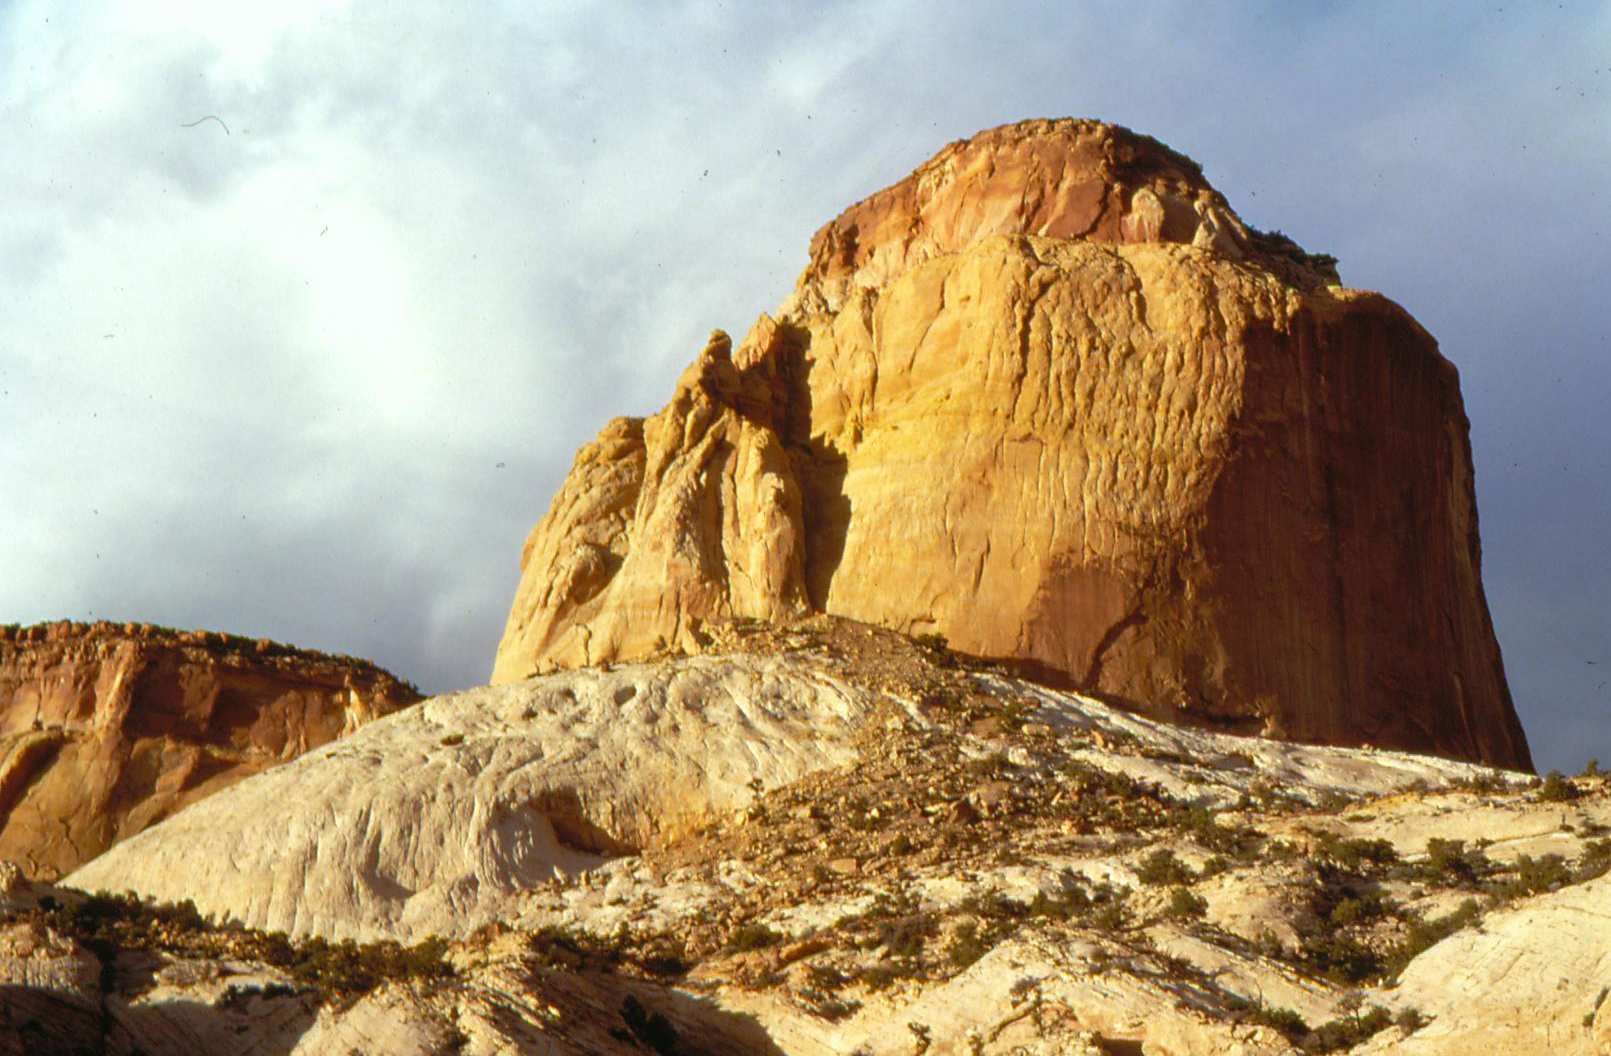 a golden tan colored sandstone monolith against a cloudy sky